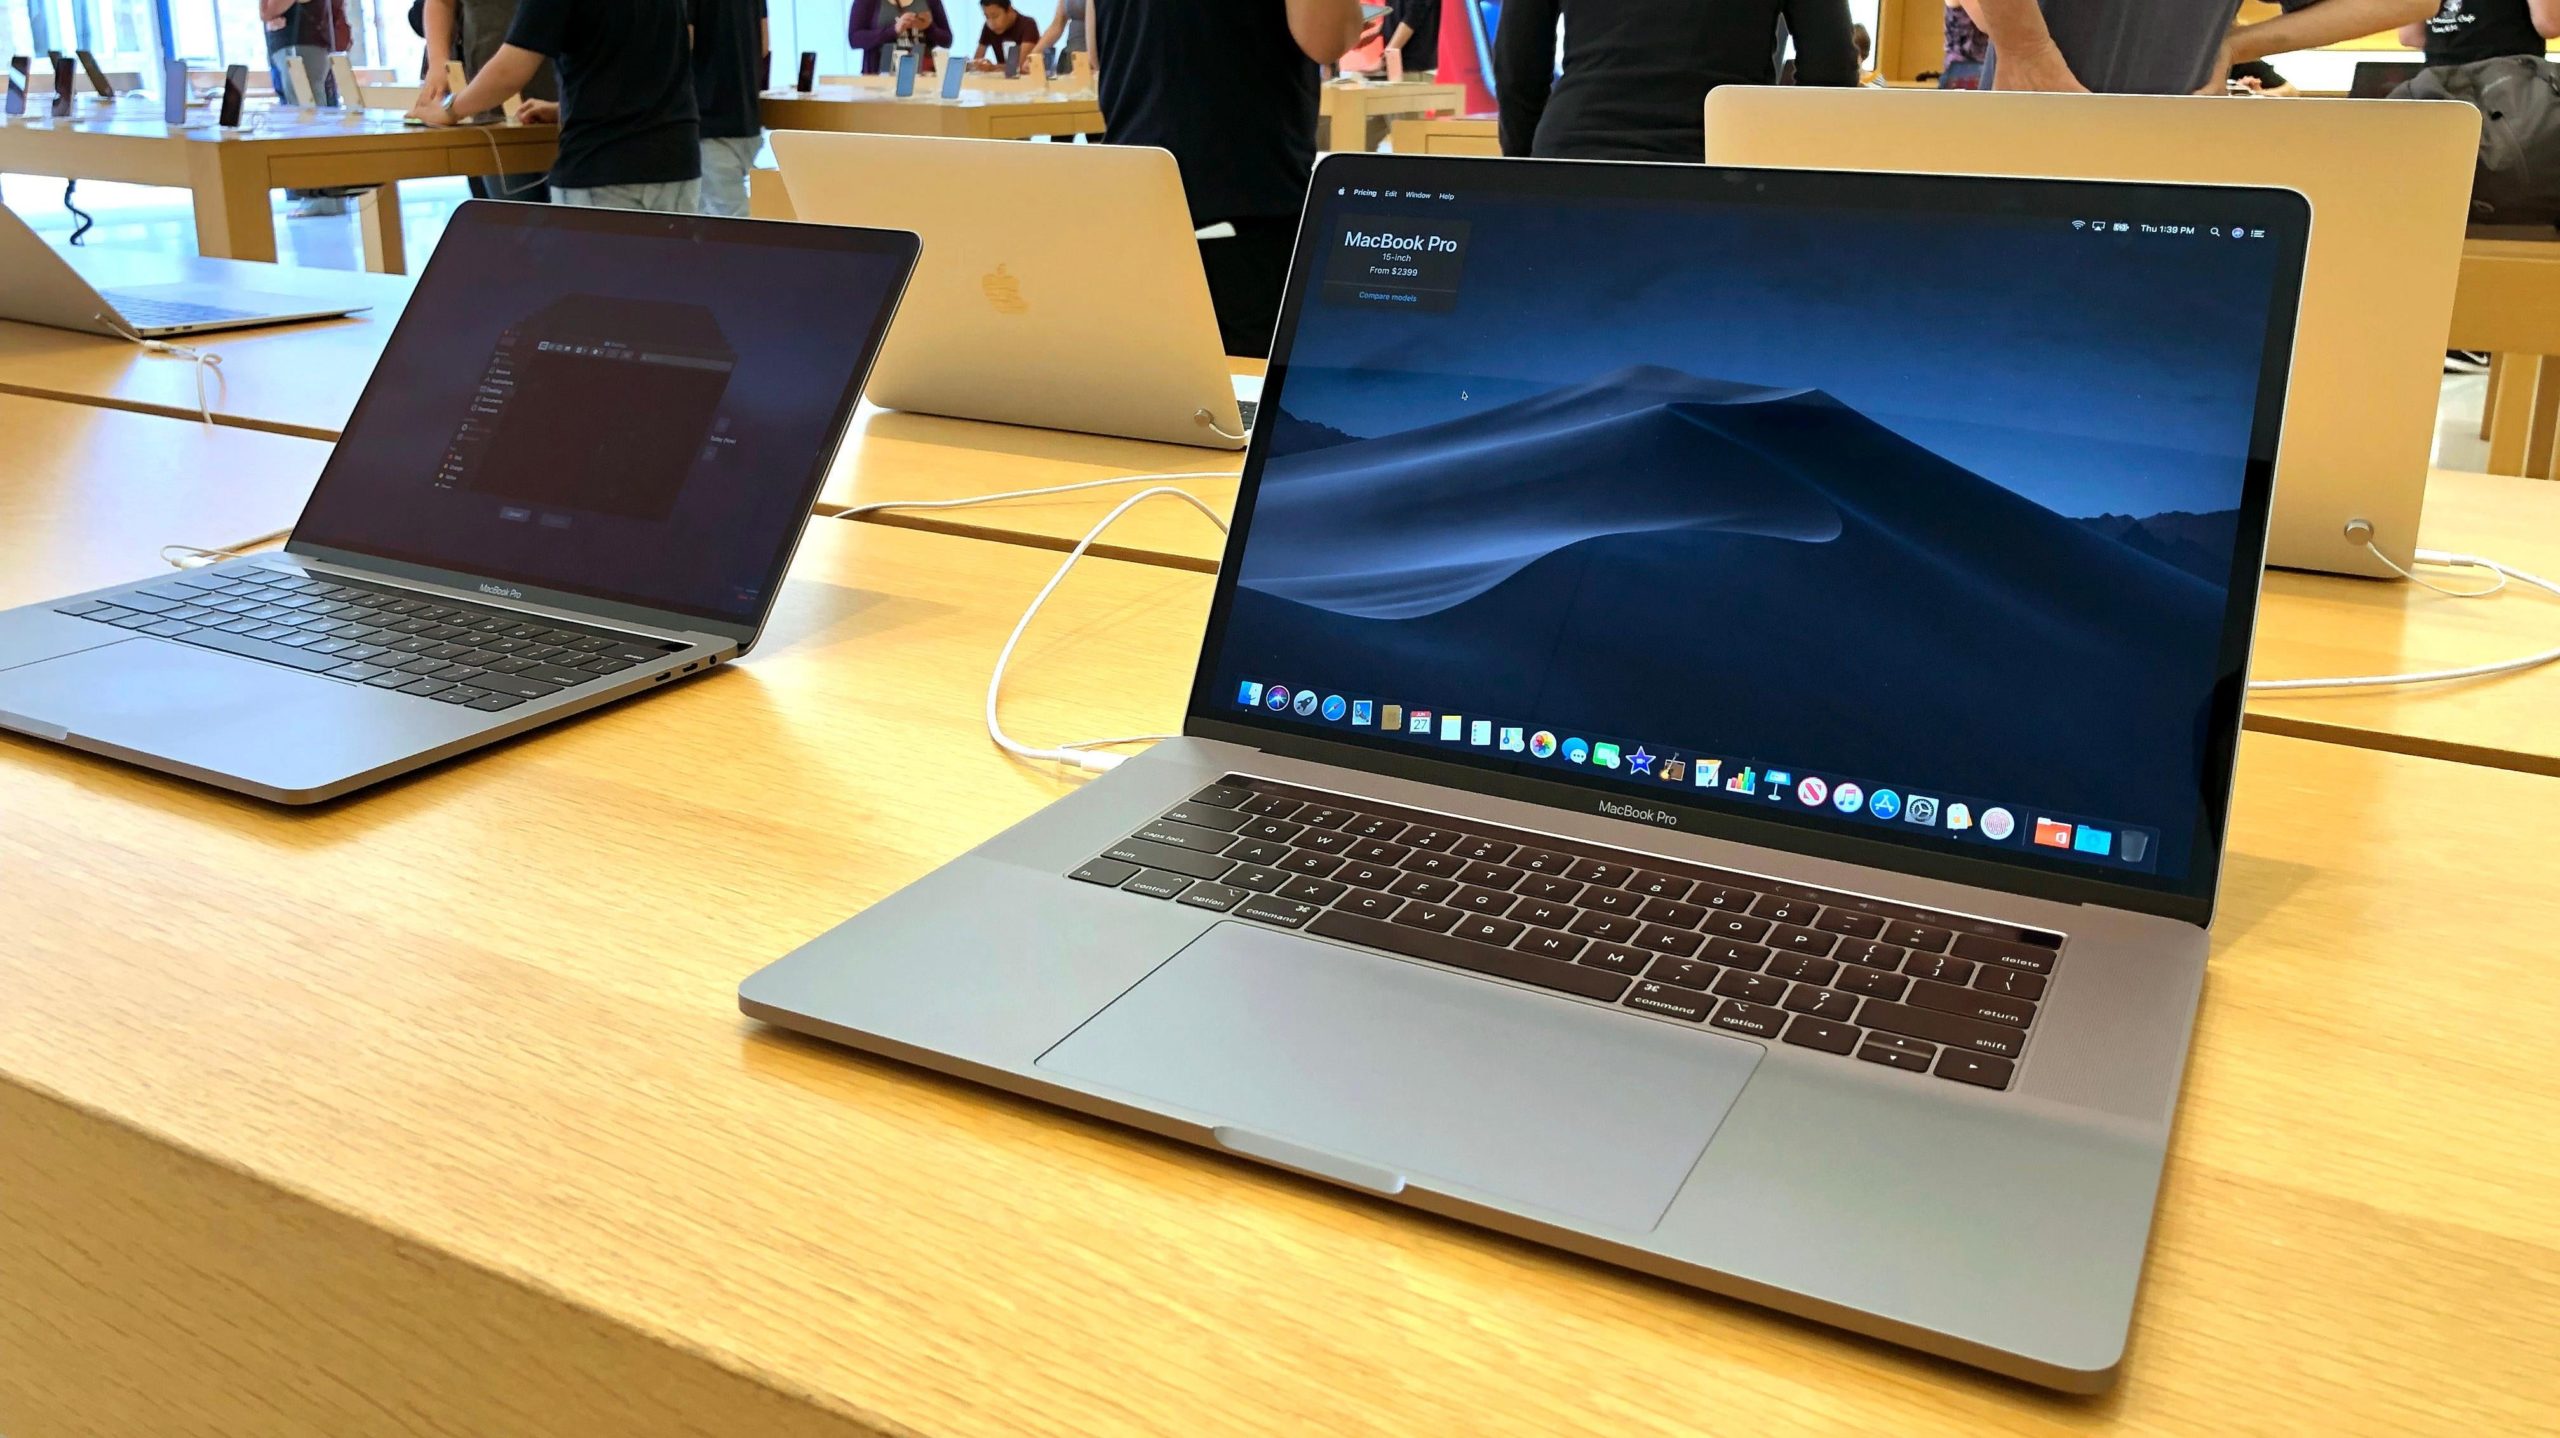 How to Save up to A408 on a New MacBook Pro (and Other Apple